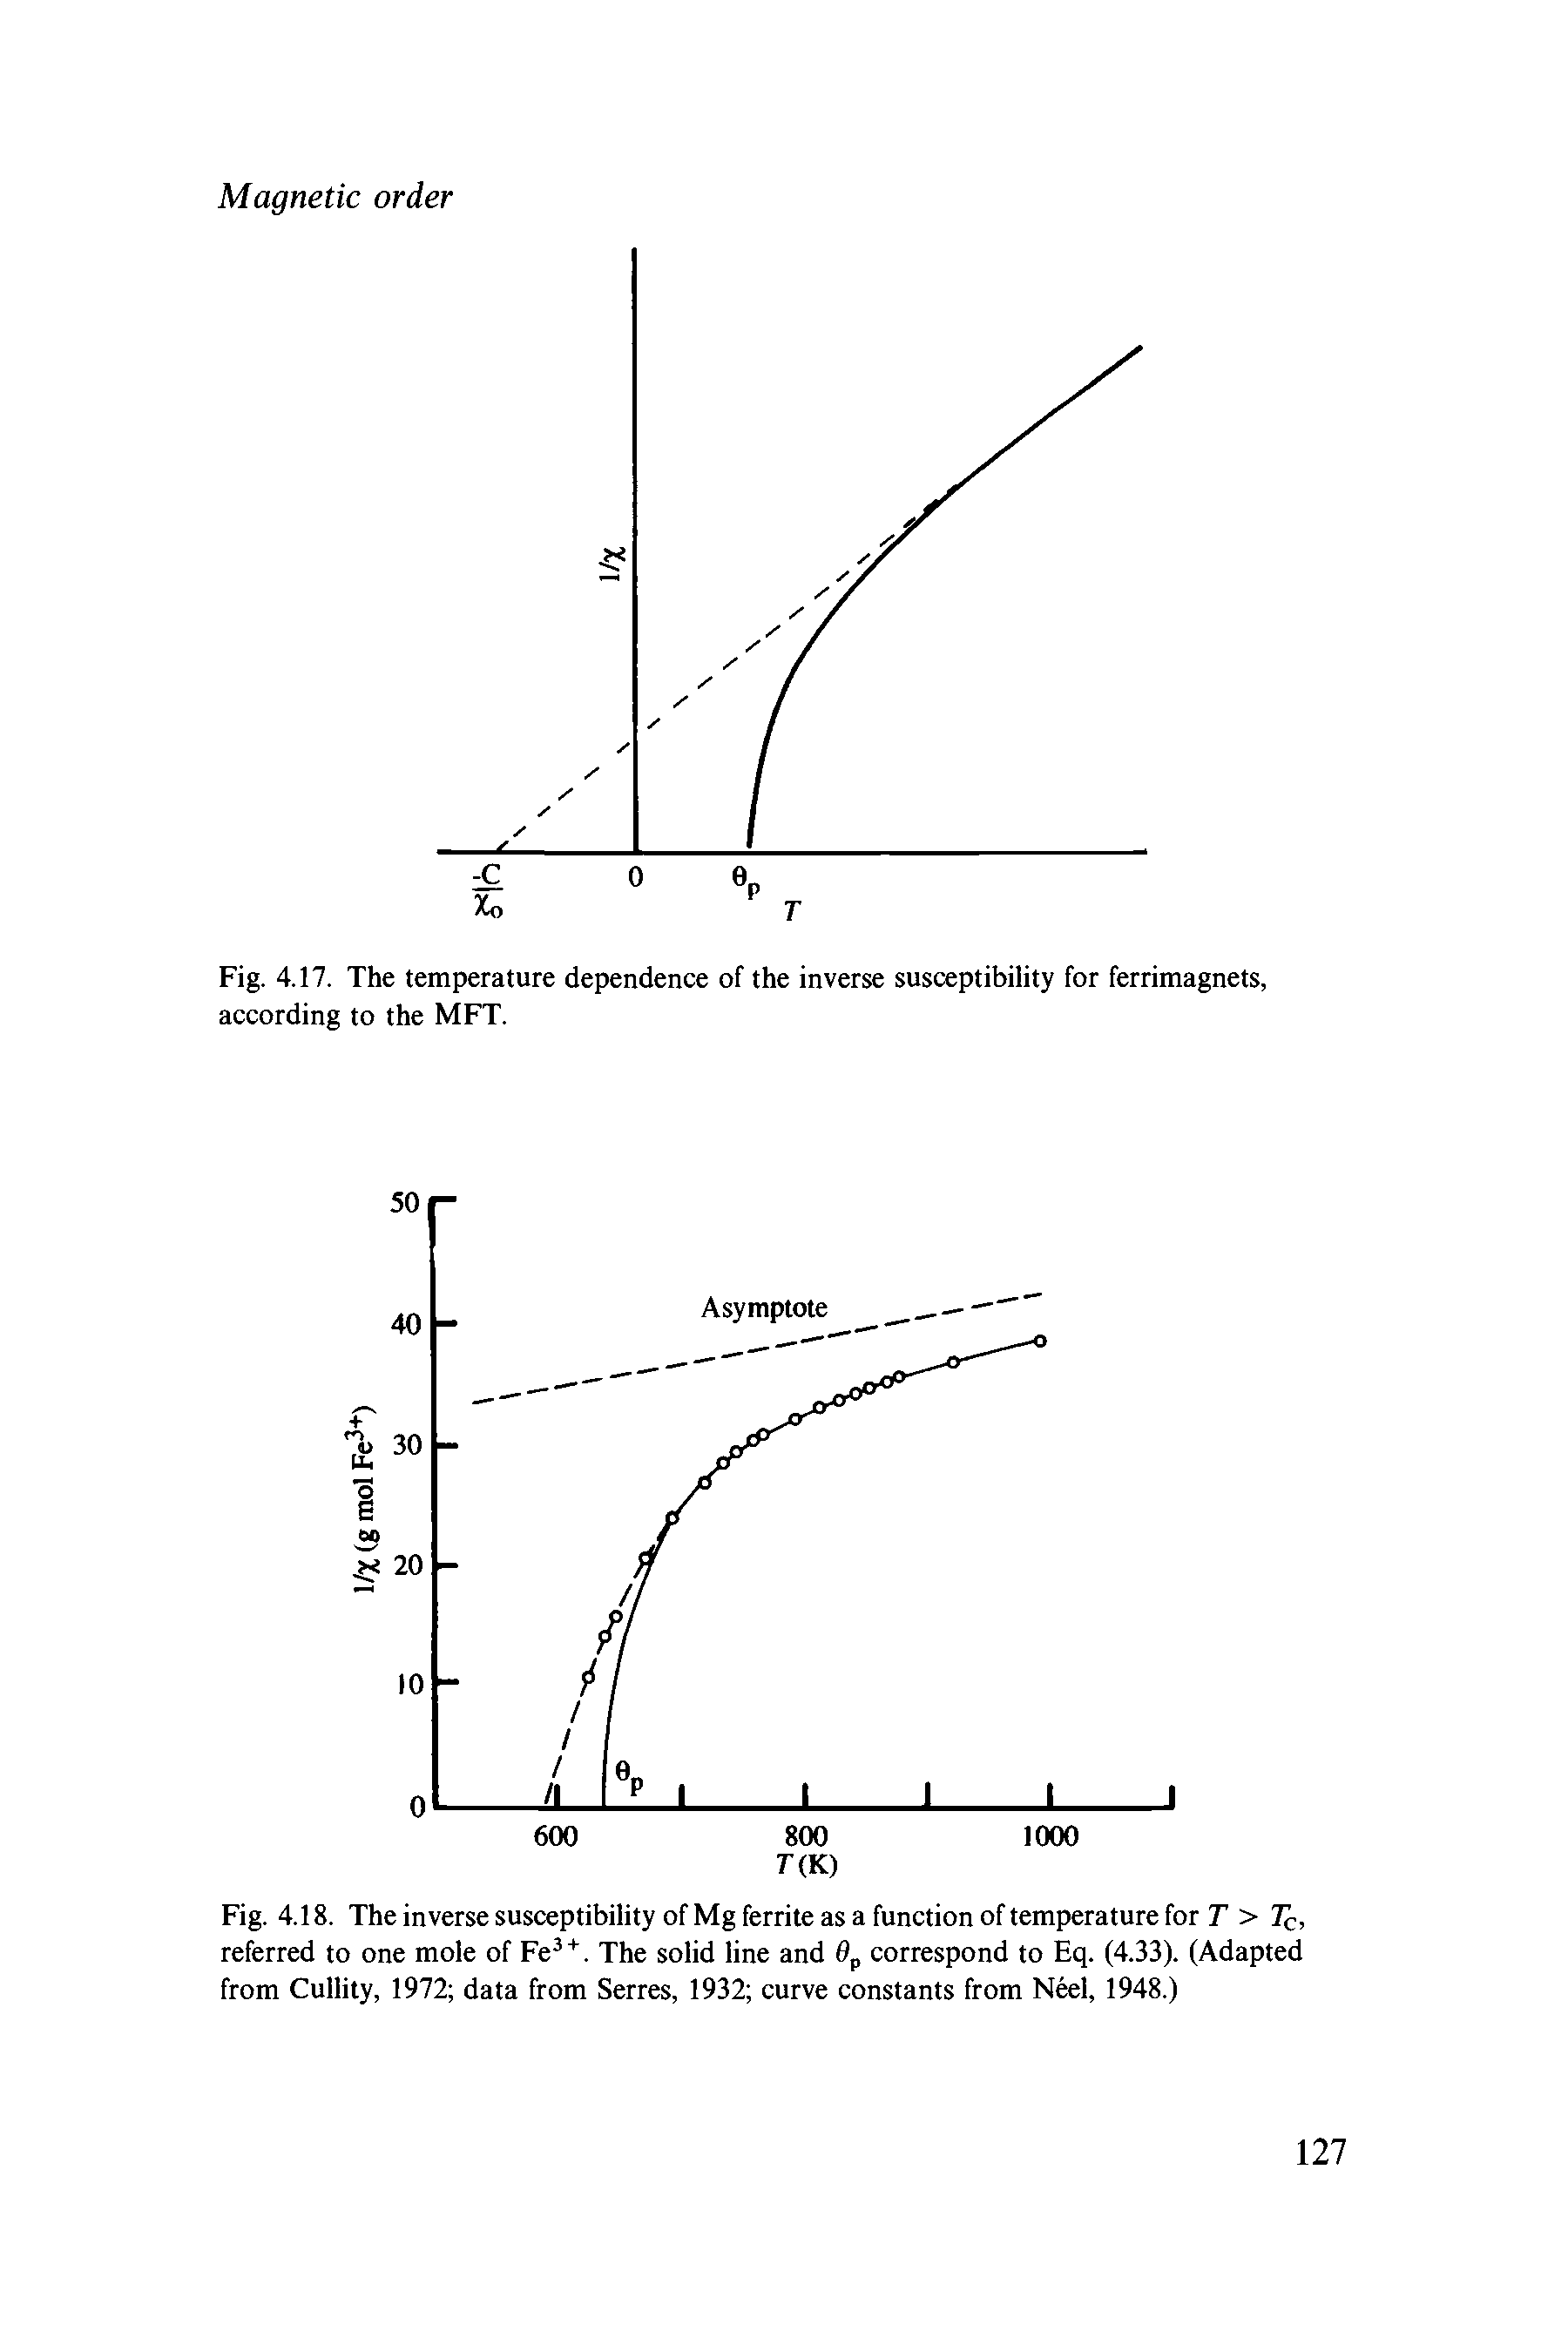 Fig. 4.18. The inverse susceptibility of Mg ferrite as a function of temperature for r > Tq, referred to one mole of Fe. The solid line and 6p correspond to Eq. (4.33). (Adapted from Cullity, 1972 data from Serres, 1932 curve constants from Neel, 1948.)...